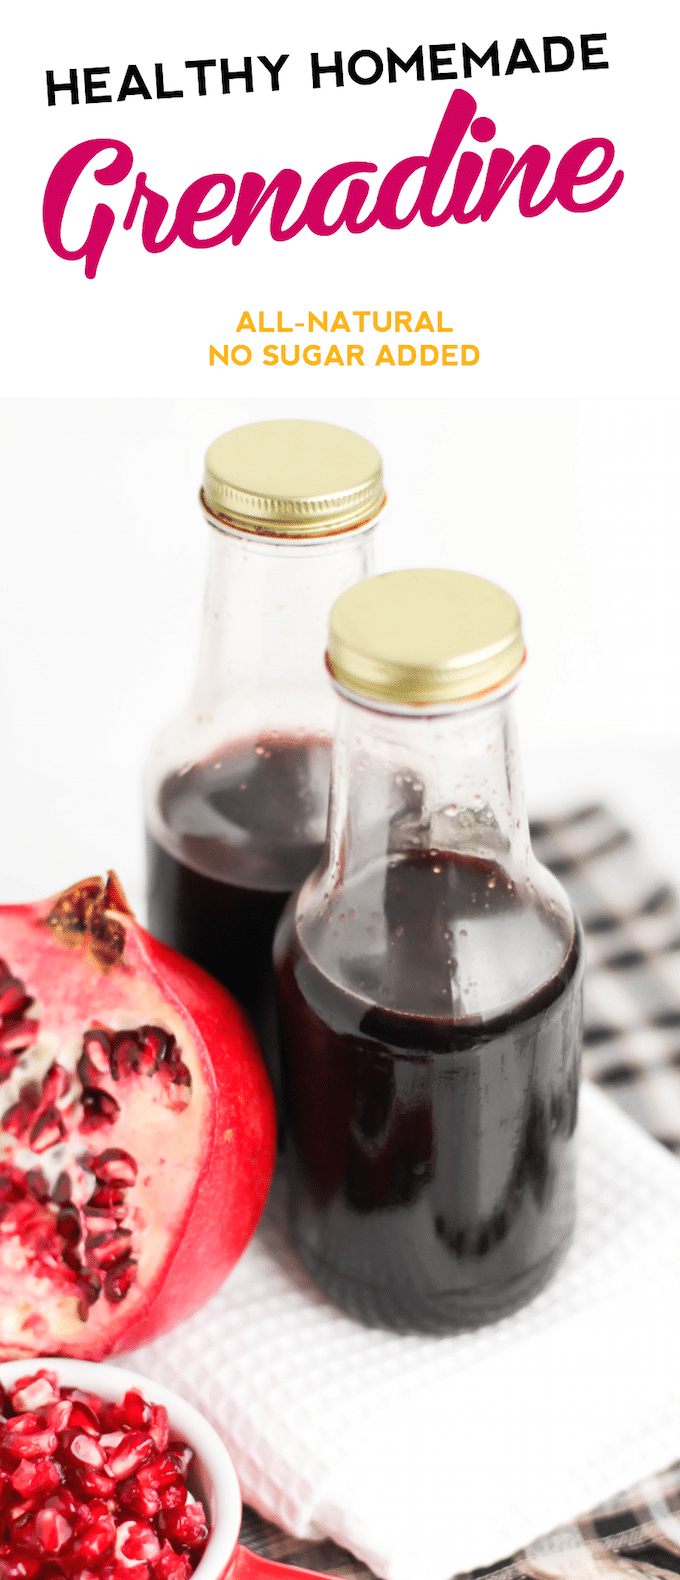 This Healthy Homemade Grenadine (aka pomegranate bar syrup) is made without the refined sugar, corn syrup, artificial colorings, and artificial flavorings!